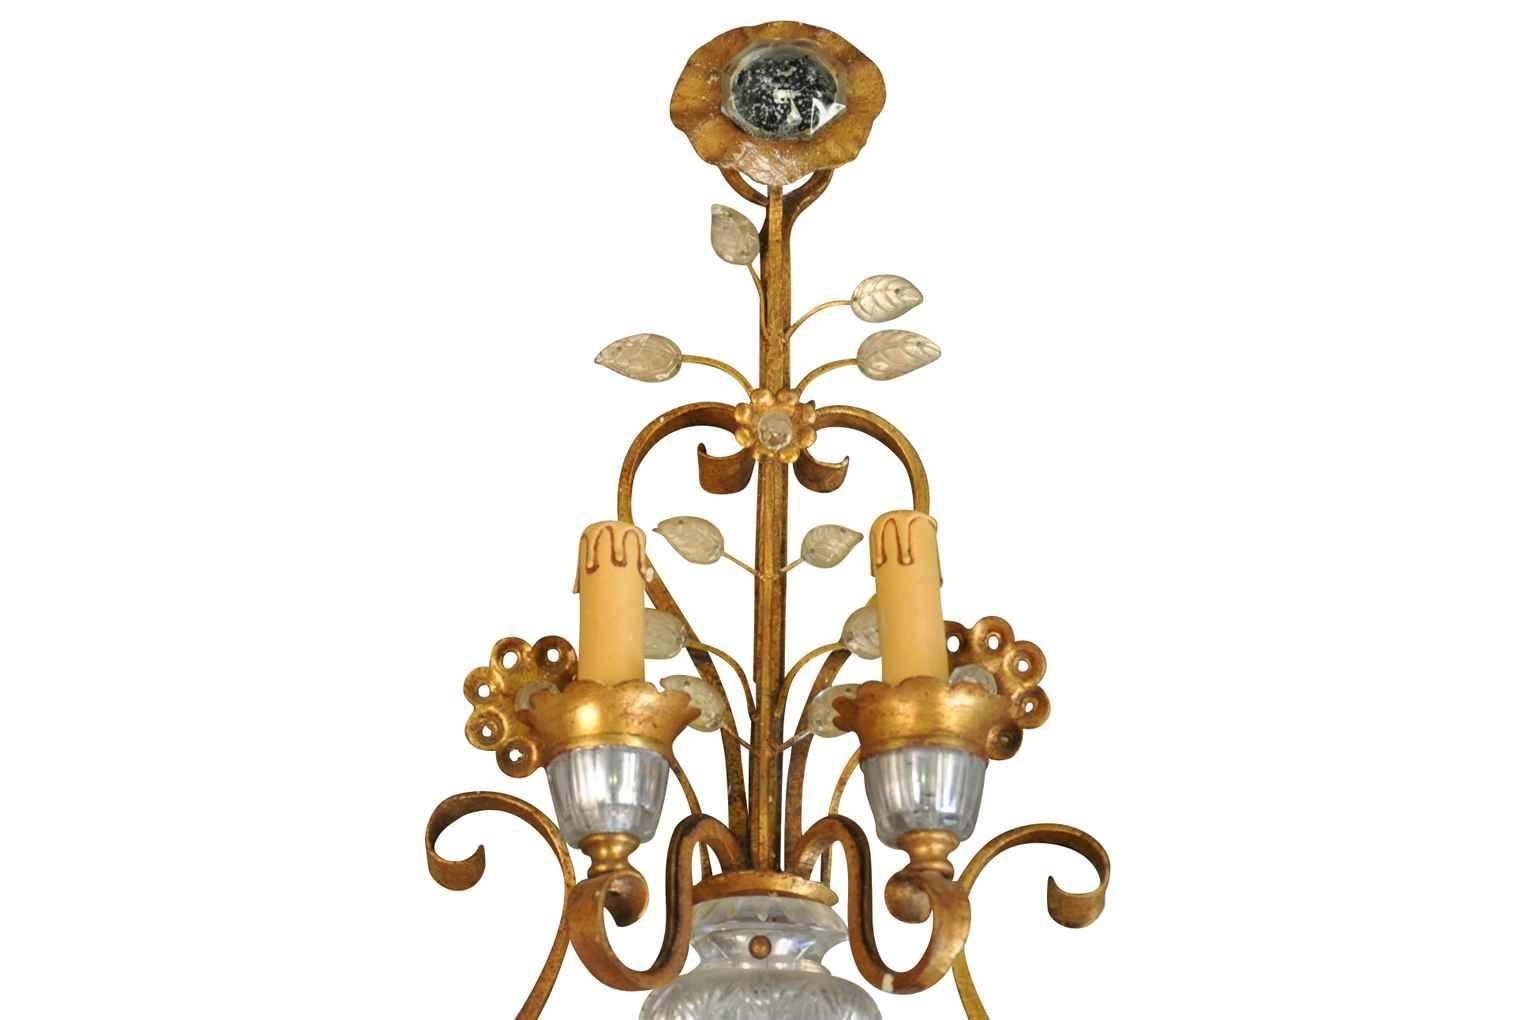 A stunning Maison Baguès applique - sconce, Paris, circa 1920. Expertly crafted with the classic Maison Baguès technique of mounting glass over silvered and gilded metal. Stunning.